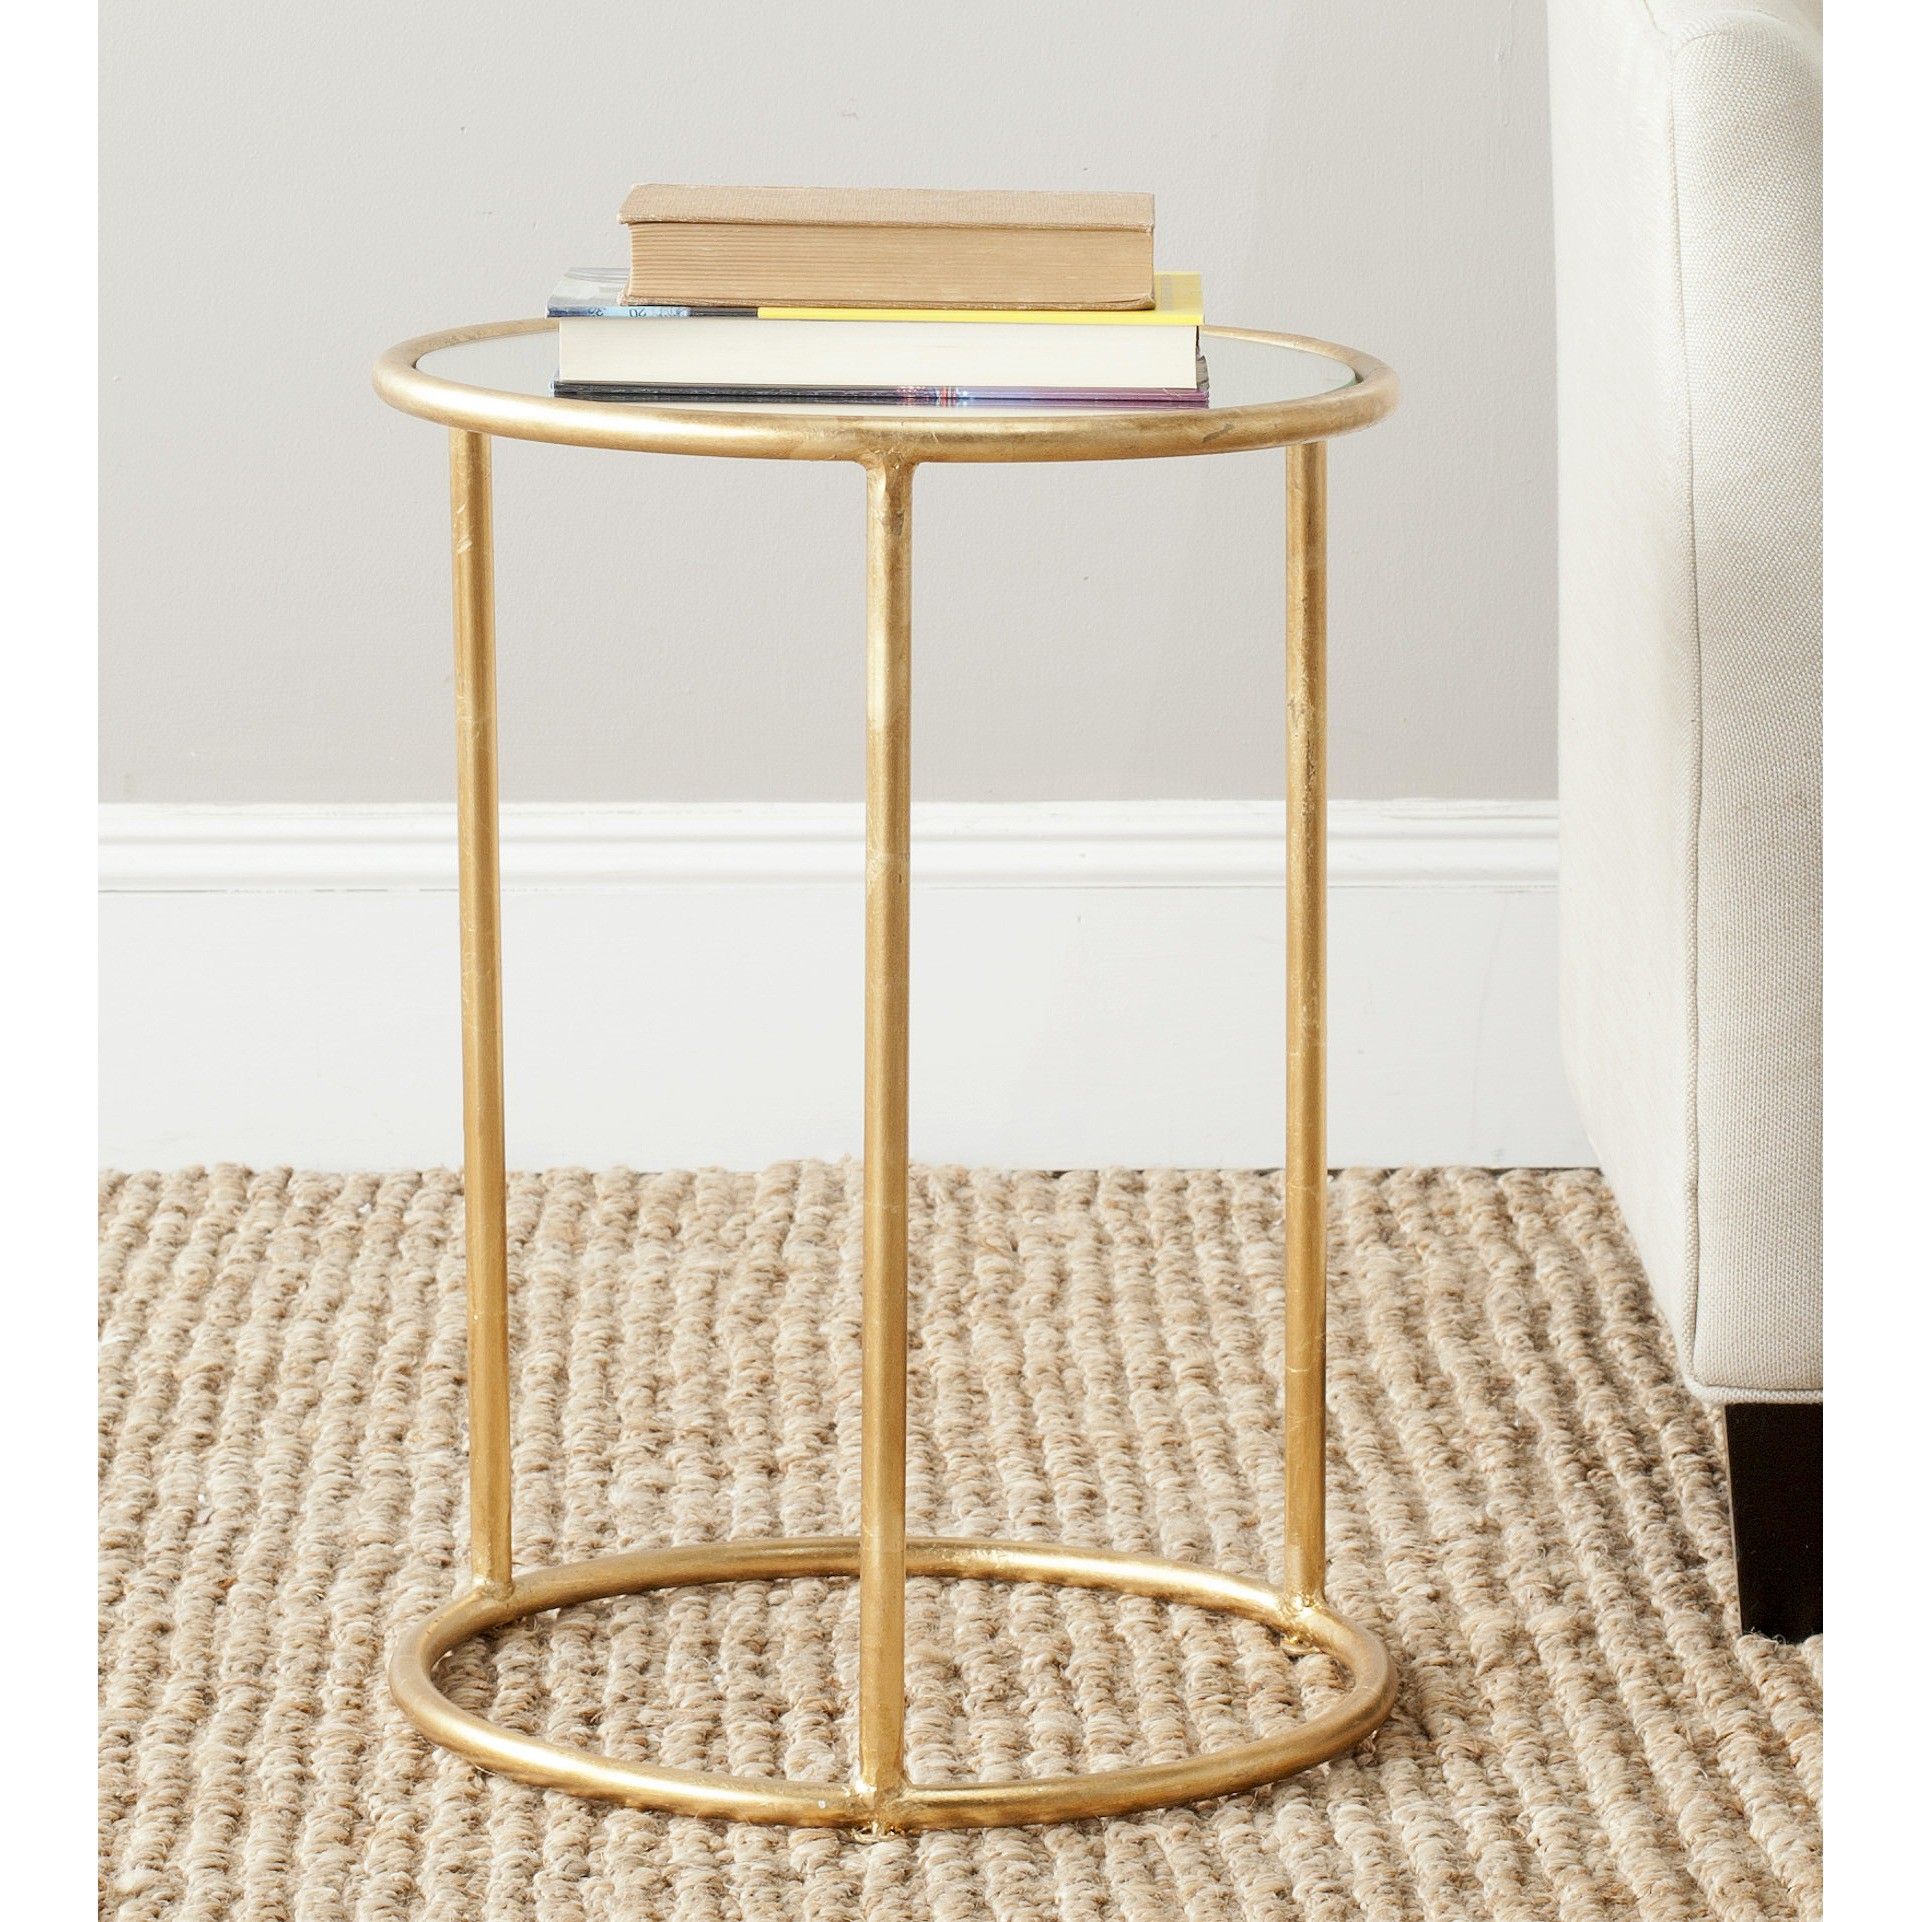 safavieh shay accent table target when apartment wants gold end mersman side tiny sofa pier one dining chairs hemnes tall dresser diy gun safe farmhouse room wicker outdoor